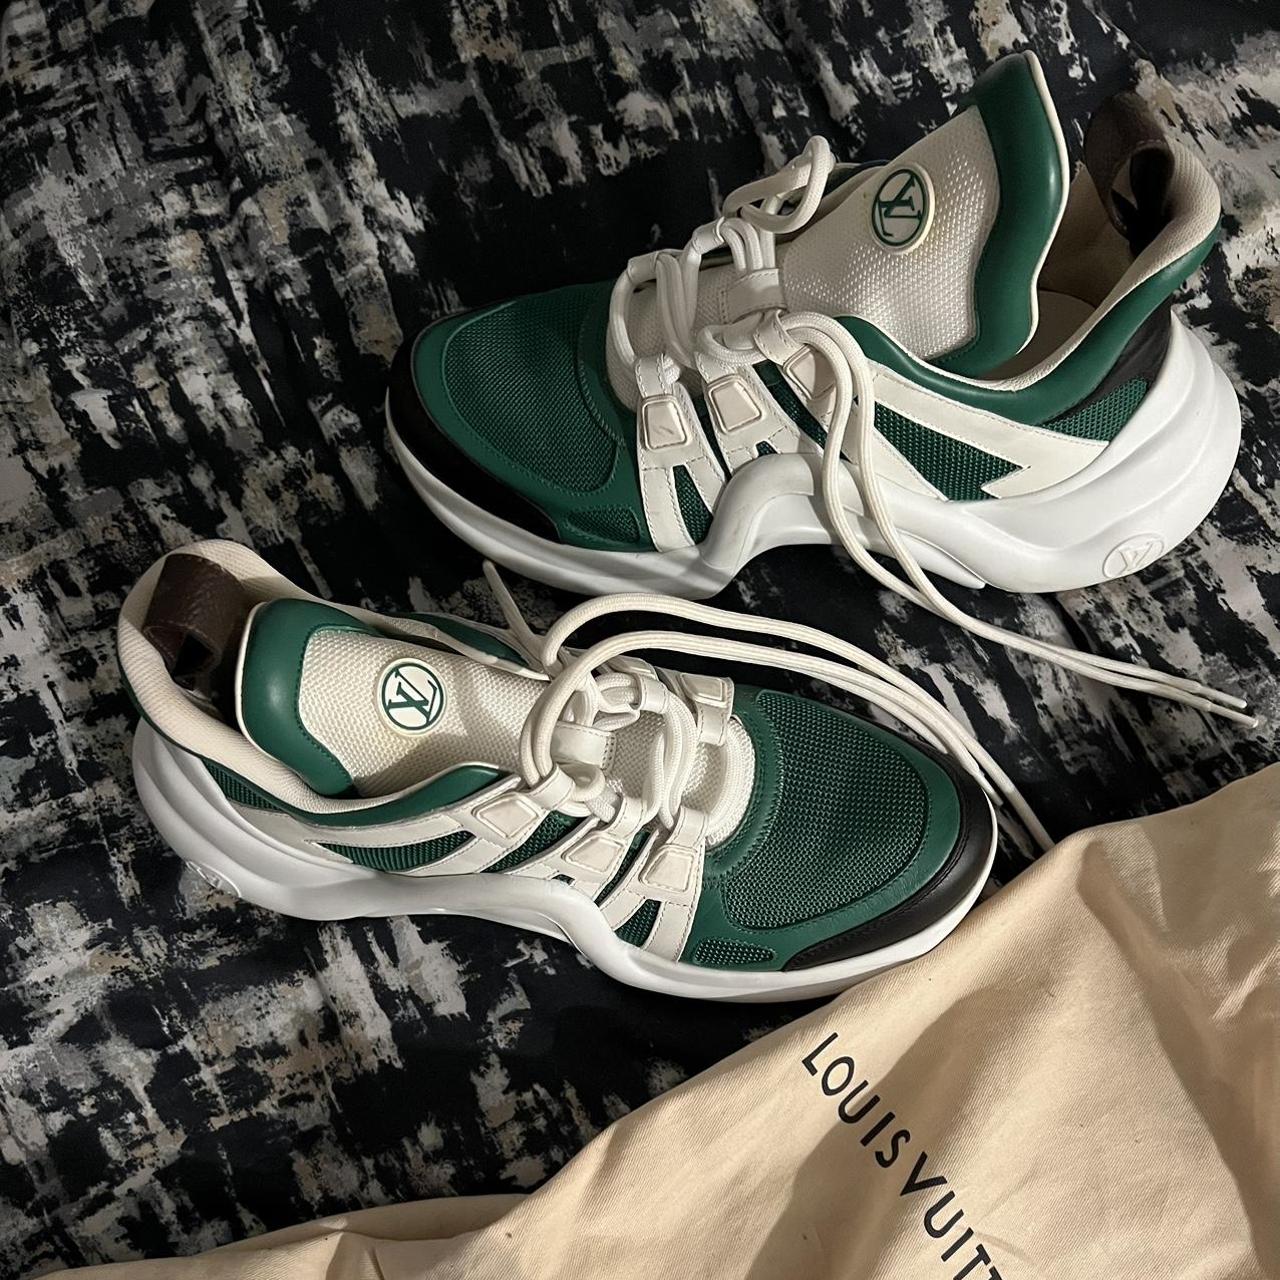 Louis Vuitton Women's LV Archlight Sneaker White And Green For